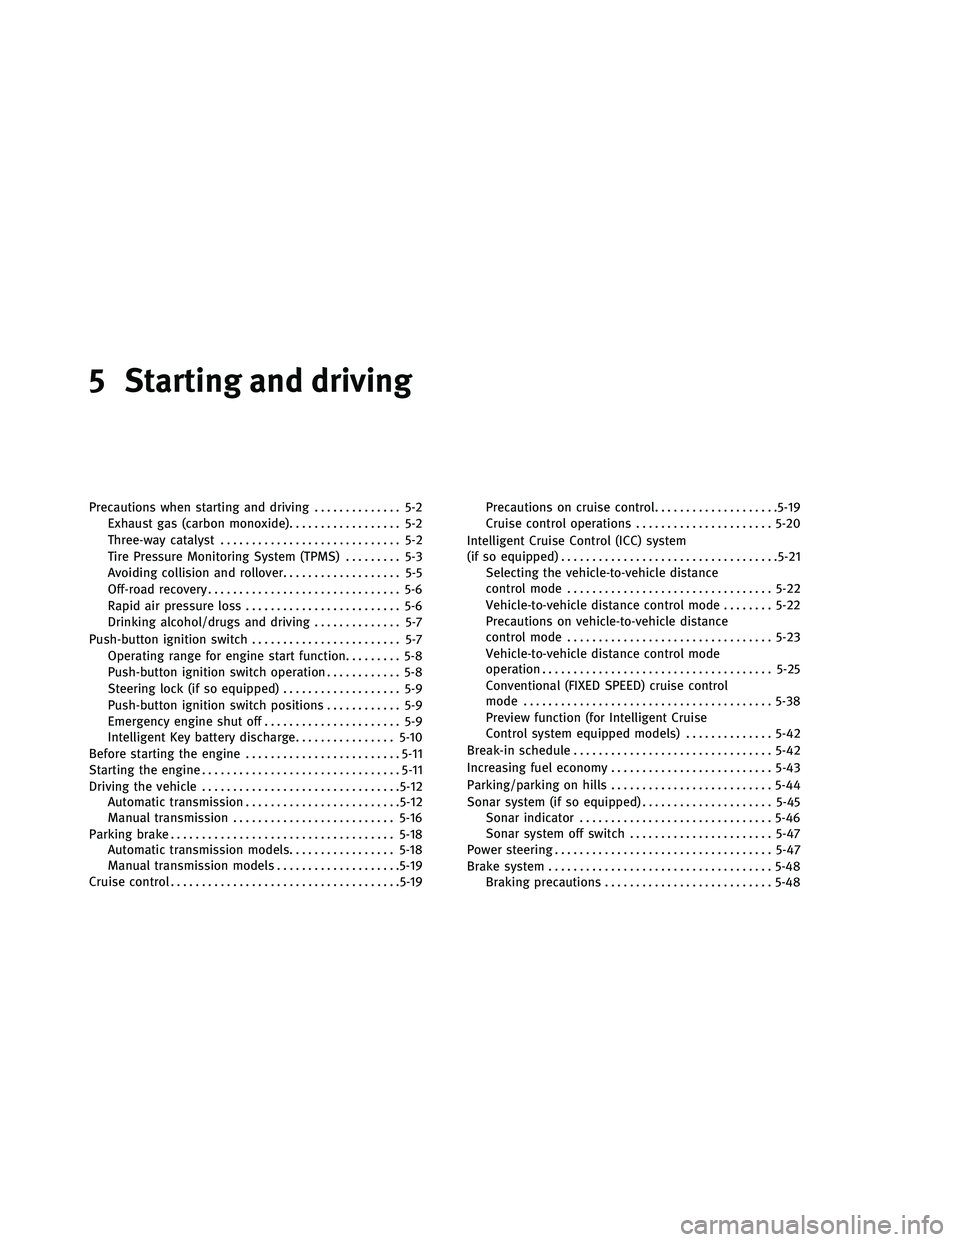 INFINITI G-CONVERTIBLE 2011  Owners Manual 5 Starting and driving
Precautions when starting and driving.............. 5-2
Exhaust gas (carbon monoxide) .................. 5-2
Three-way catalyst ............................. 5-2
Tire Pressure M